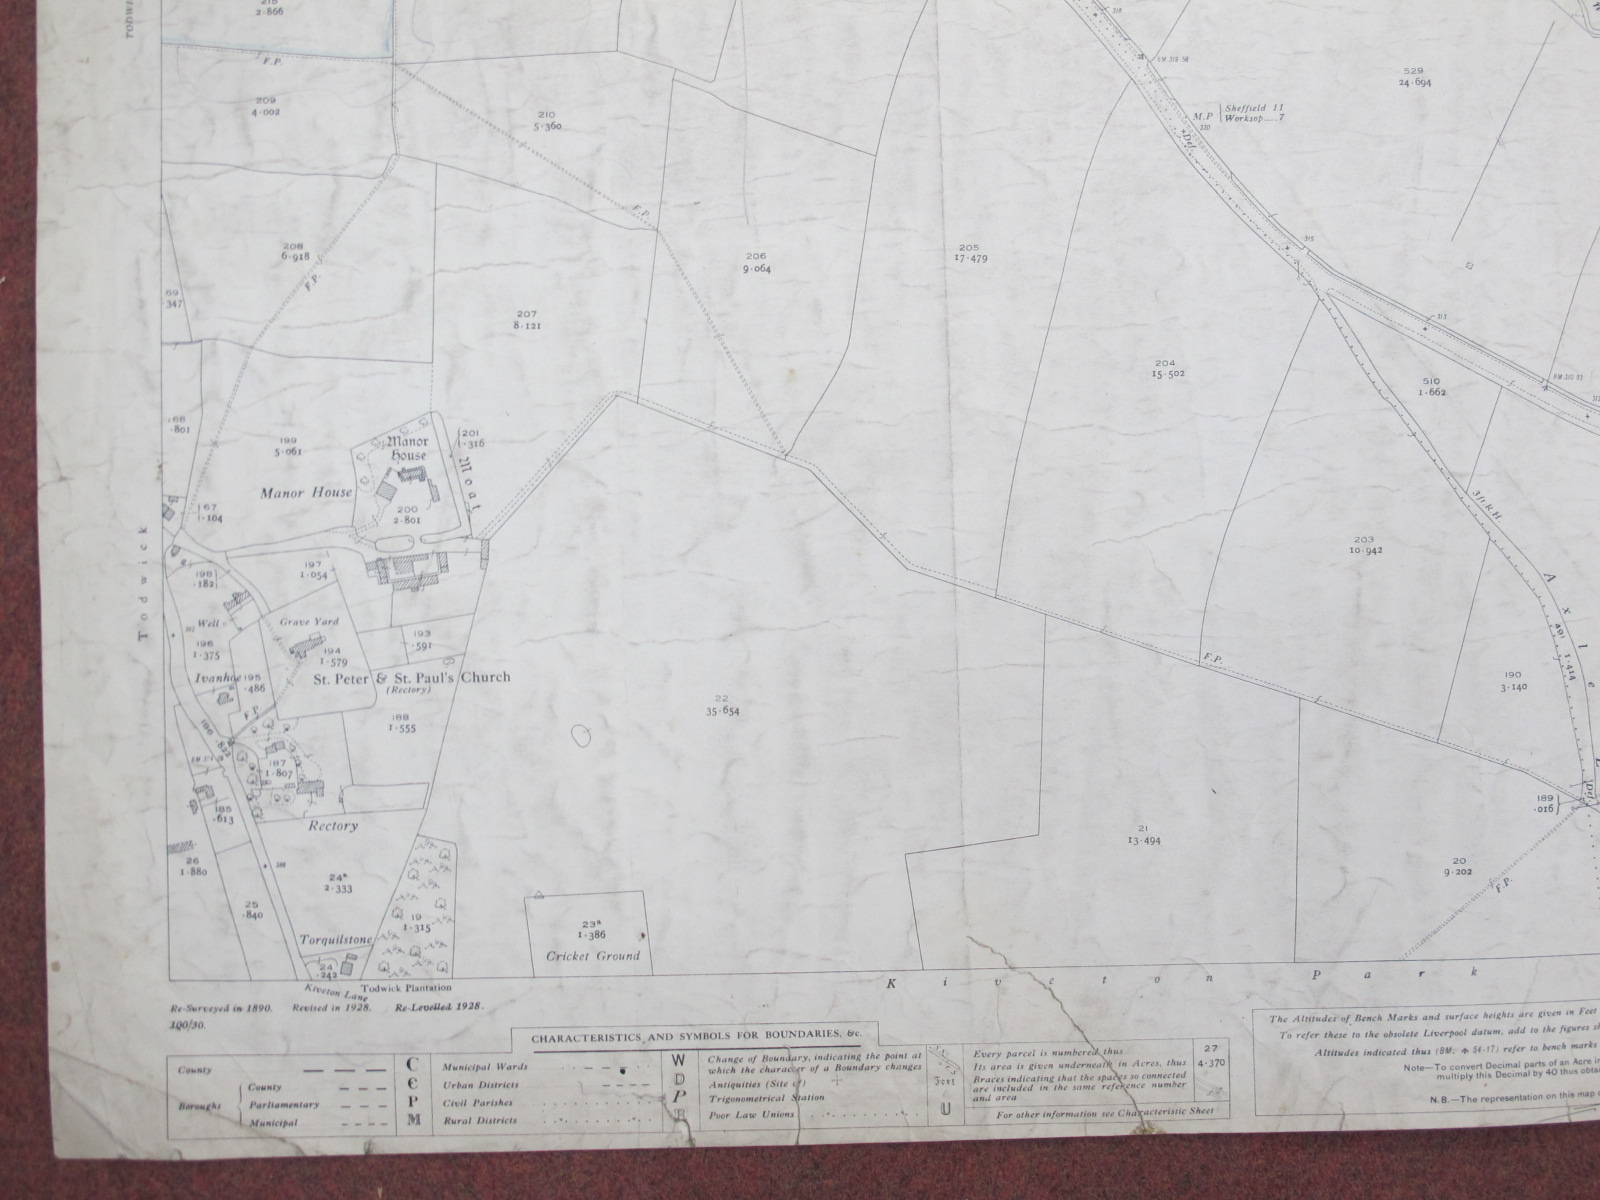 West Riding Yorkshire Maps, Rotherham, Treeton, North Anston and area - some dates noted 1931, 1935, - Image 9 of 10